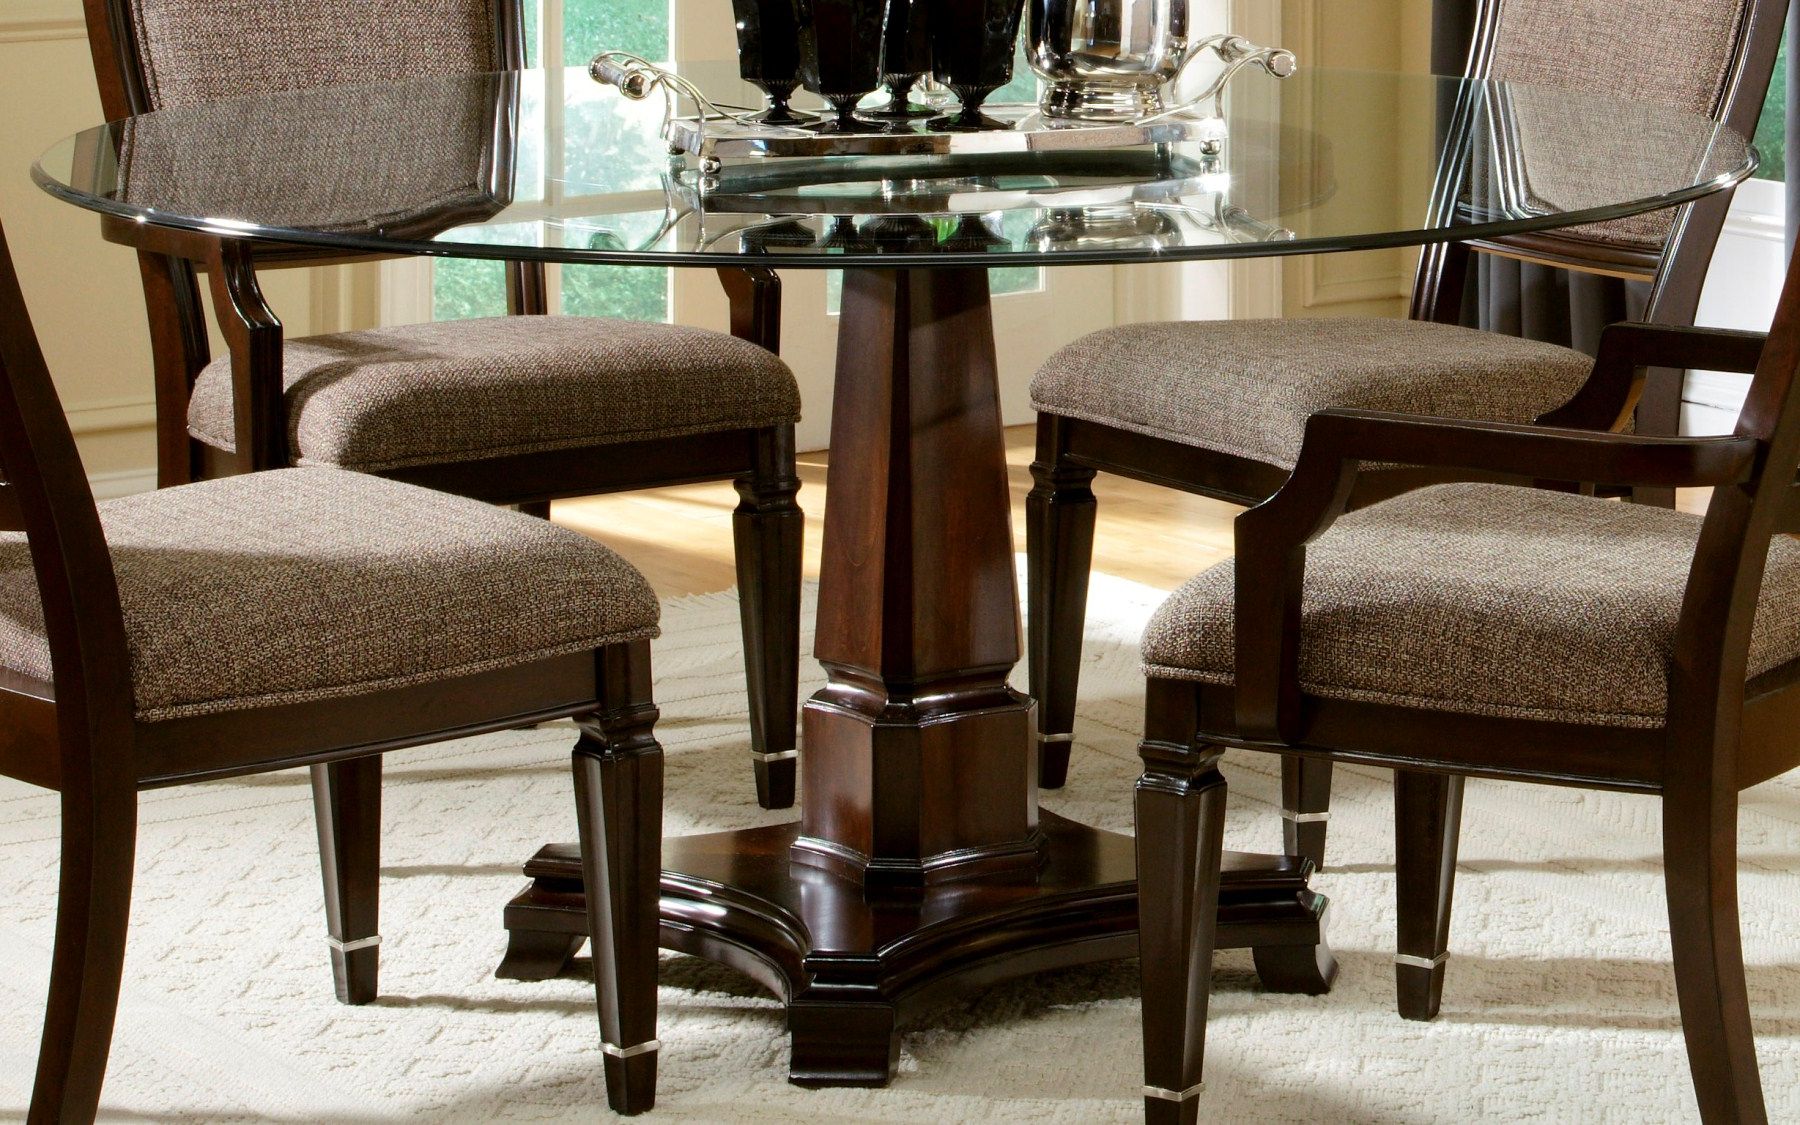 Homesfeed With Regard To Most Popular Round Dining Tables With Glass Top (View 26 of 30)